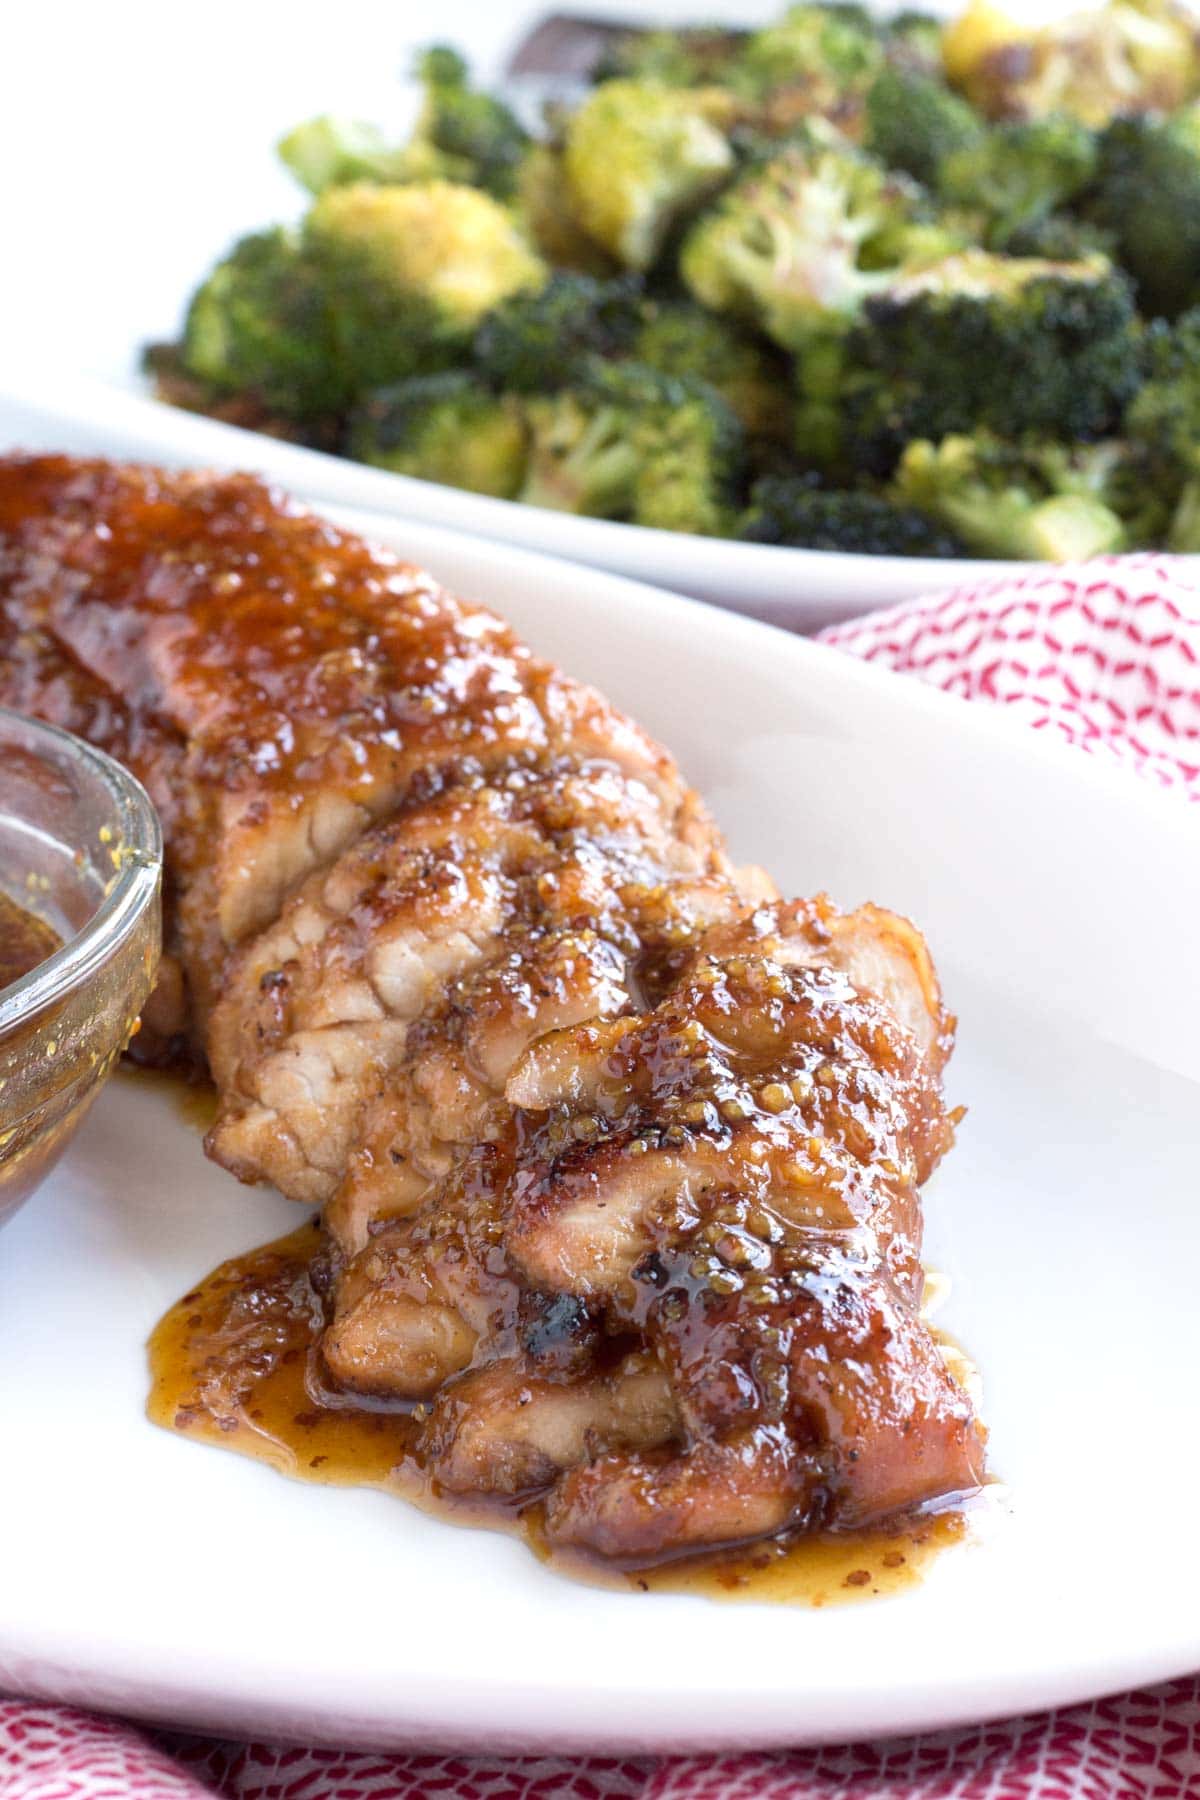 Slices of the best pork tenderloin on a serving plate with broccoli in the background.